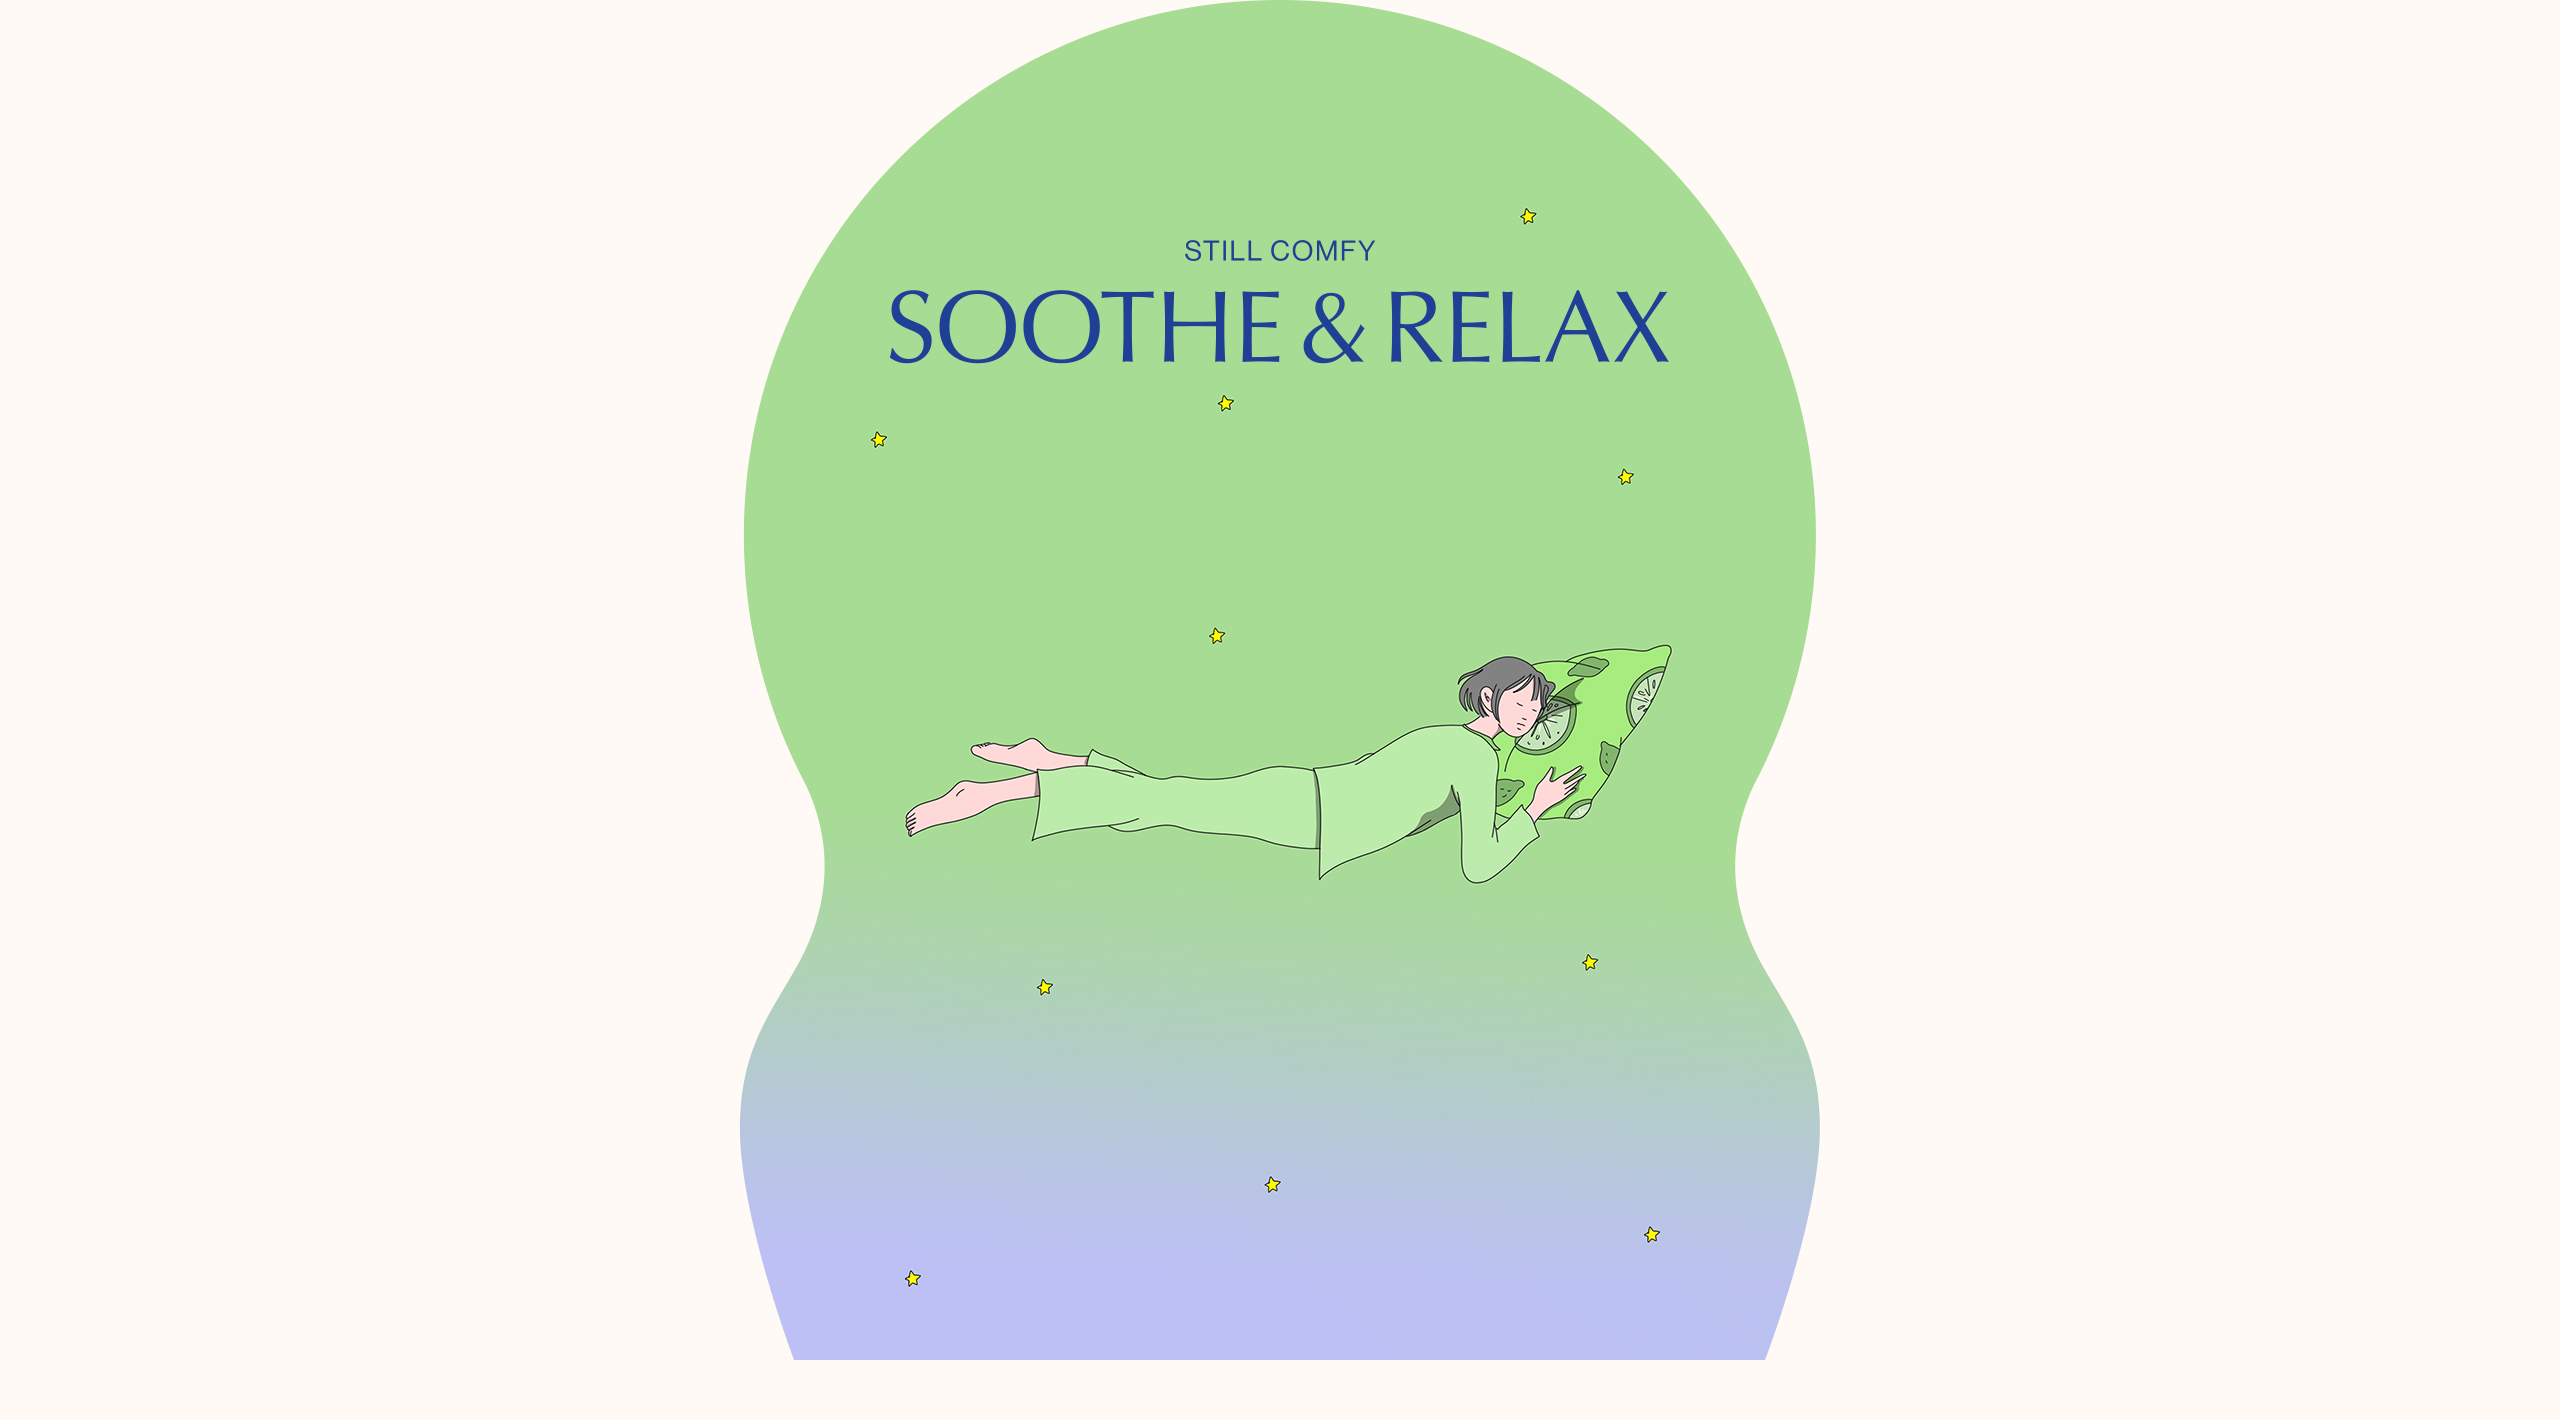 SOOTHE & RELAX